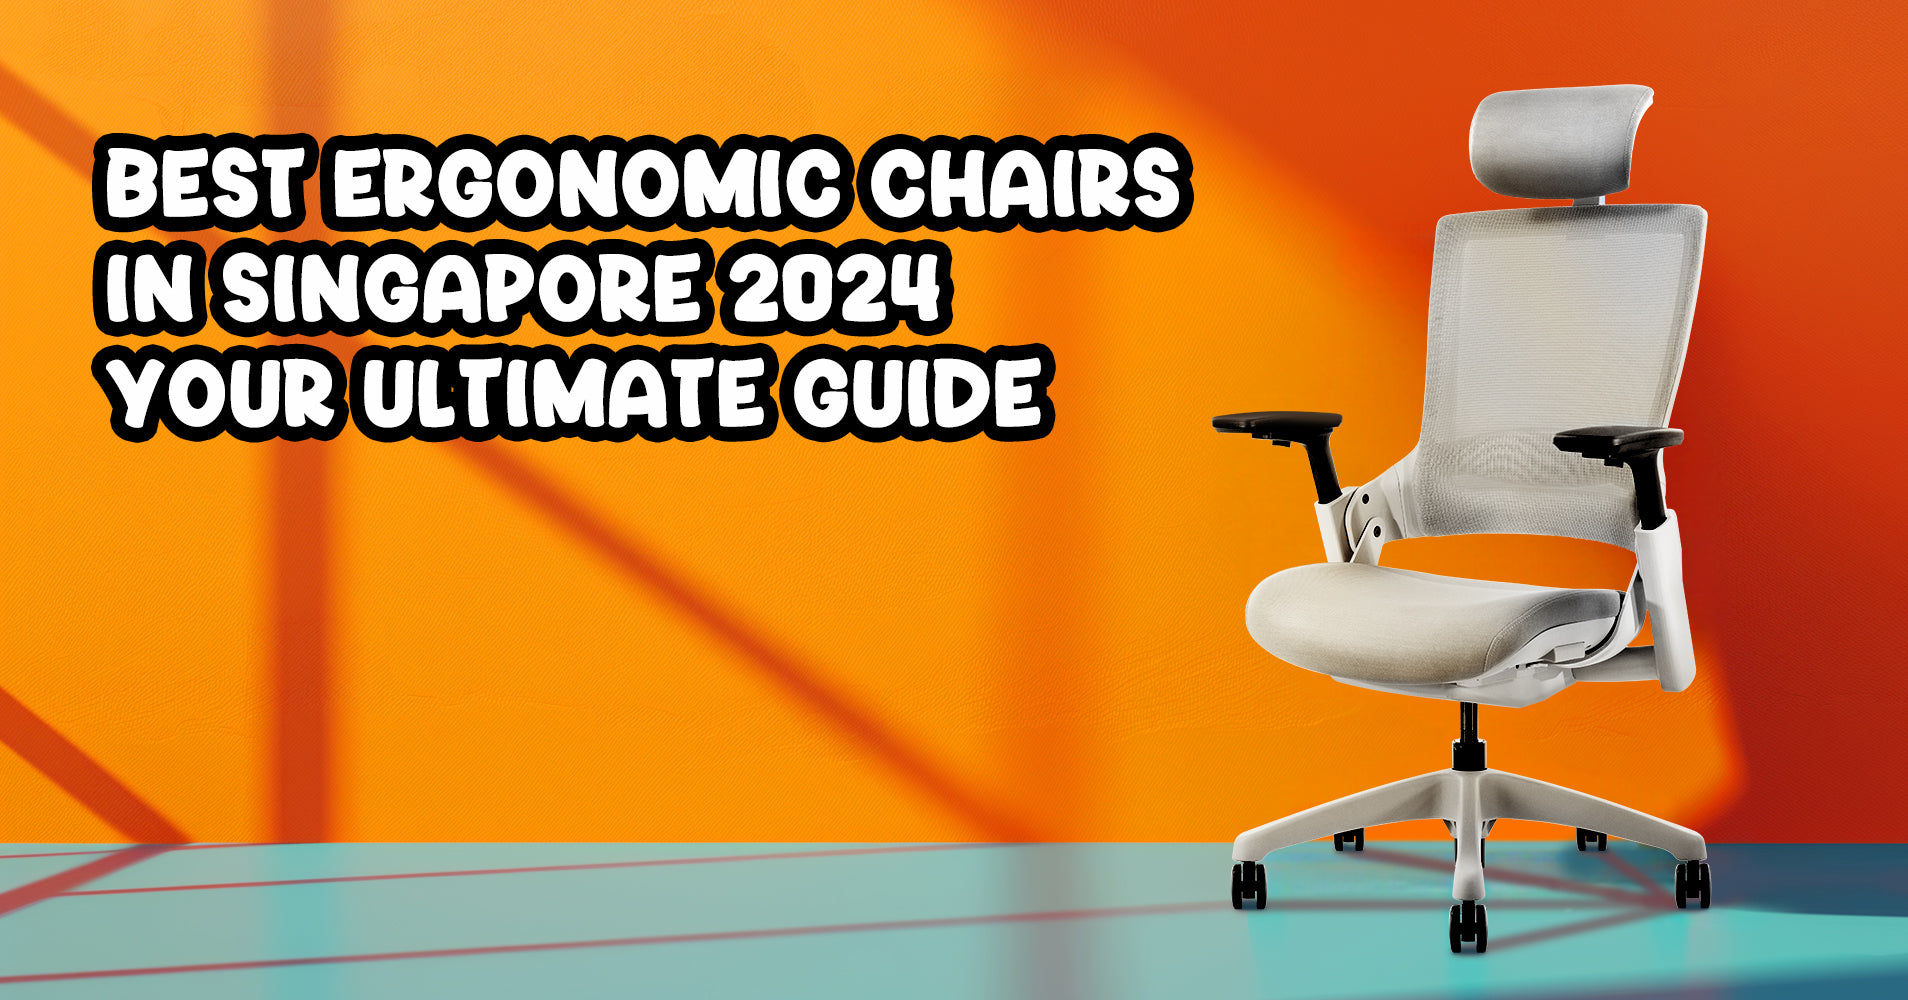 Best Ergonomic Chairs in Singapore 2024: Your Ultimate Guide, featuring a modern white ergonomic office chair on an orange background.